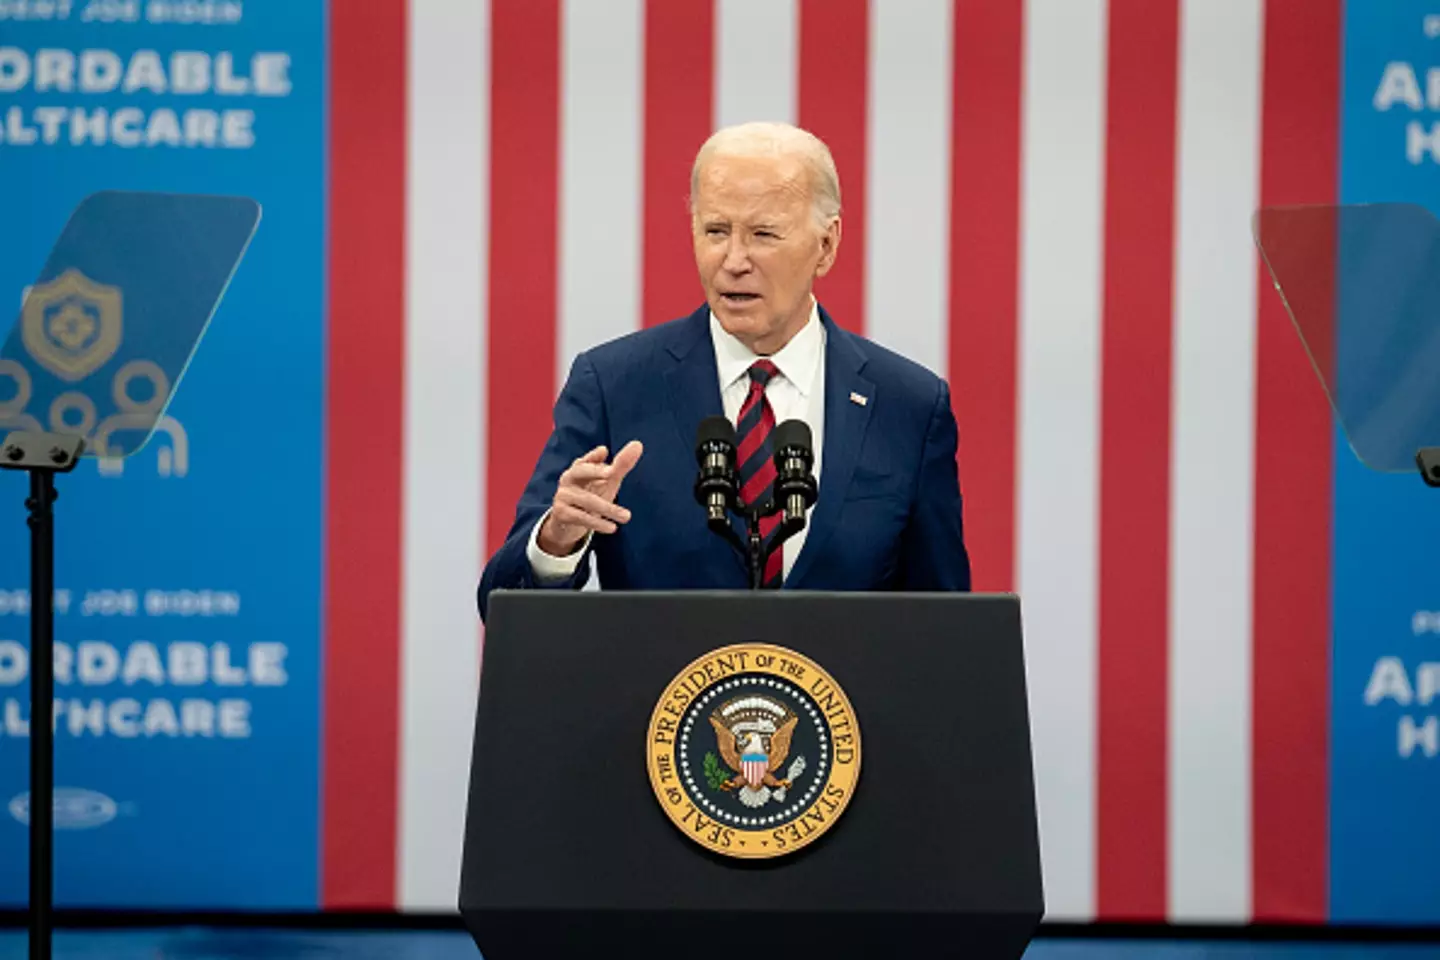 There were calls for Biden to take part in primary debates earlier this year.